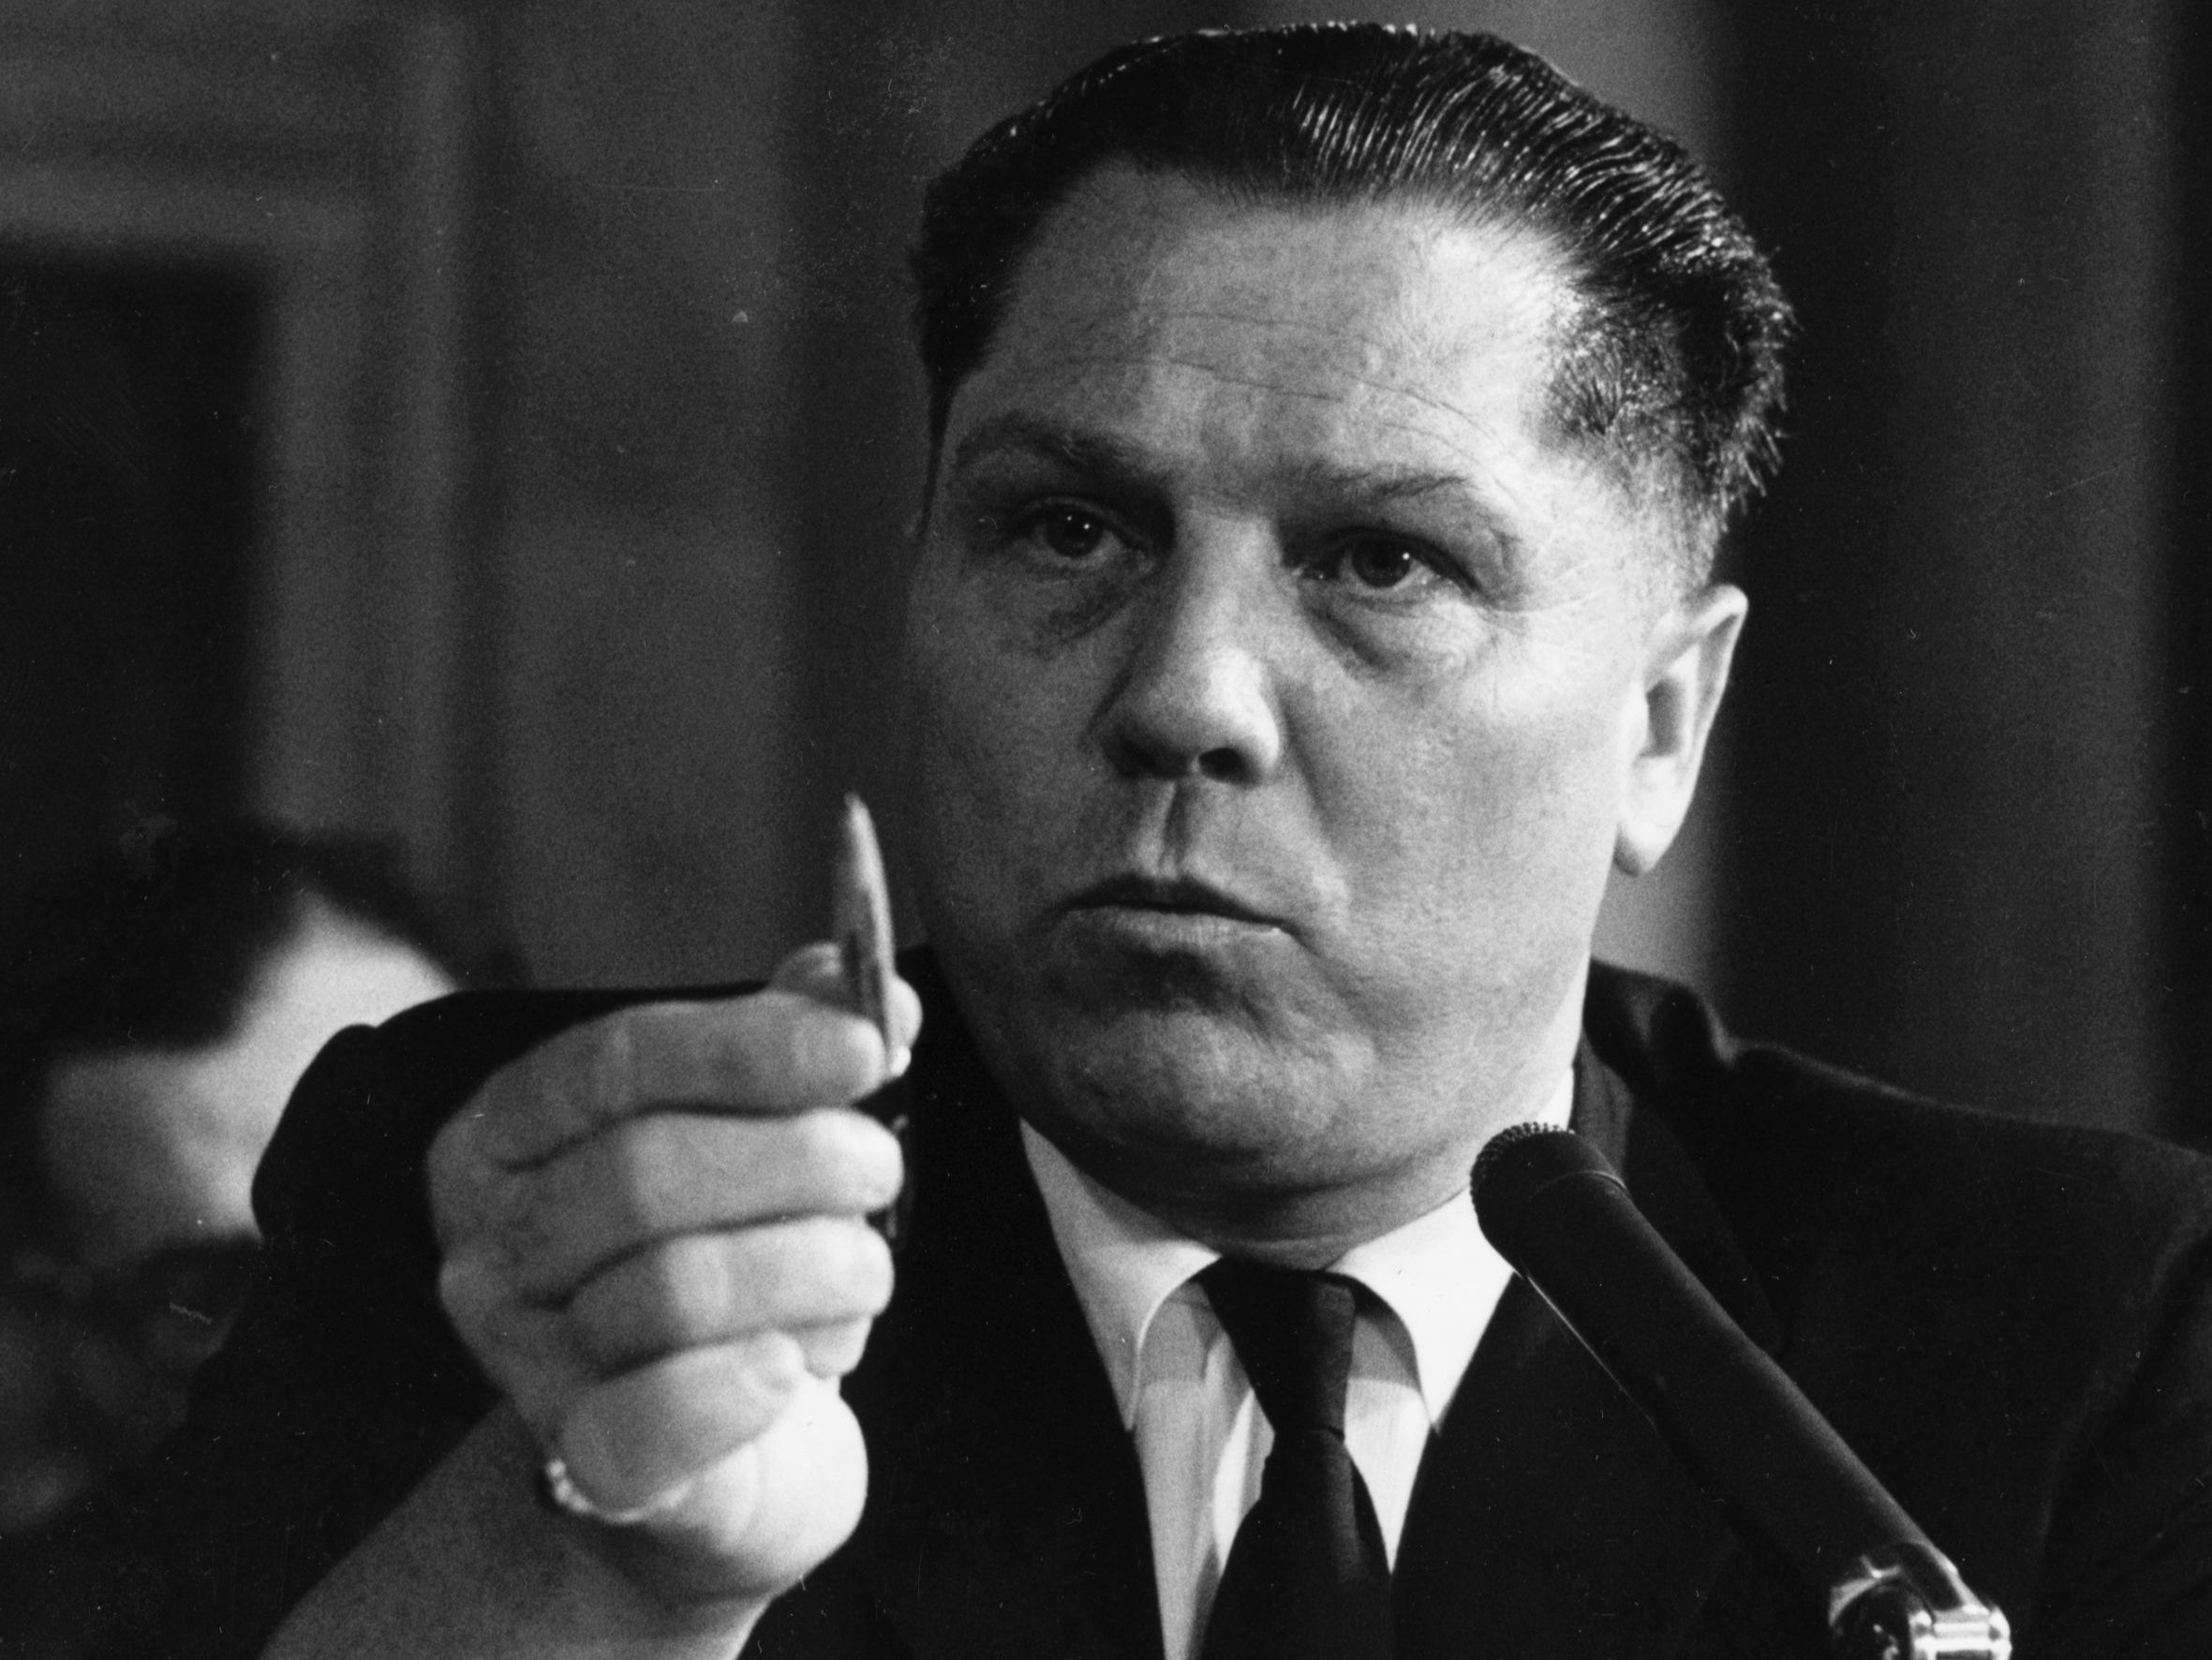 American labour leader Jimmy Hoffa (1913 - 1975), President of the Teamster’s Union, testifying at a hearing investigating labor rackets on 11 August 1958